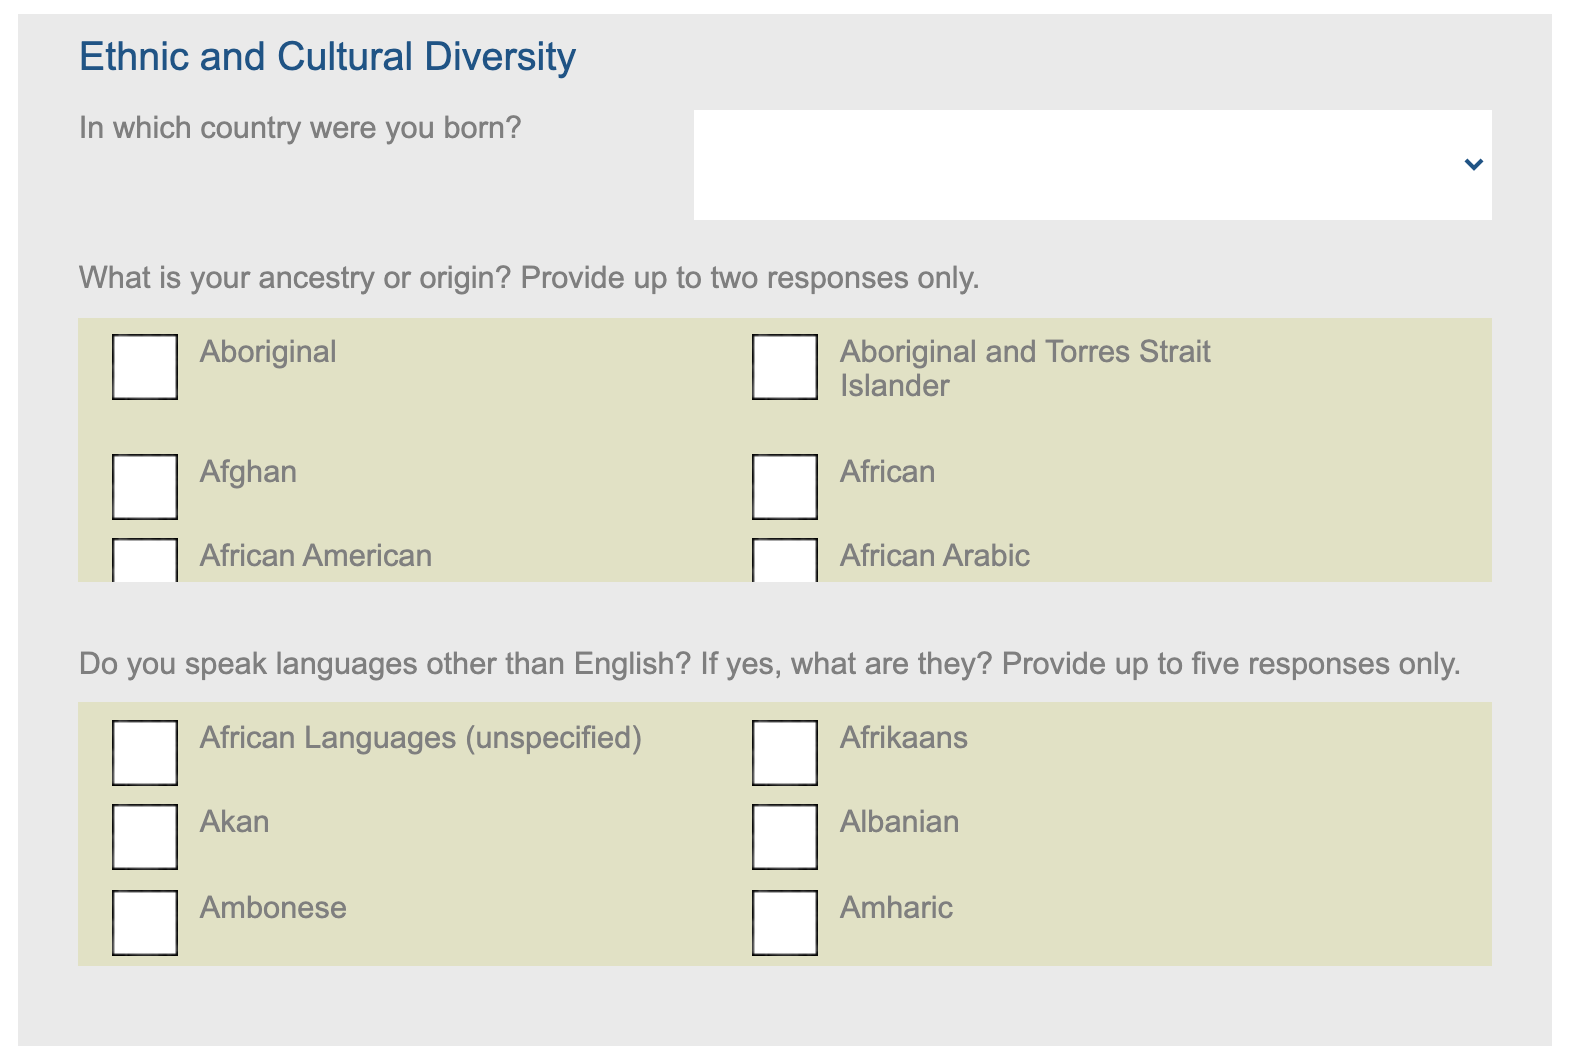 Ethnic and cultural diversity questions